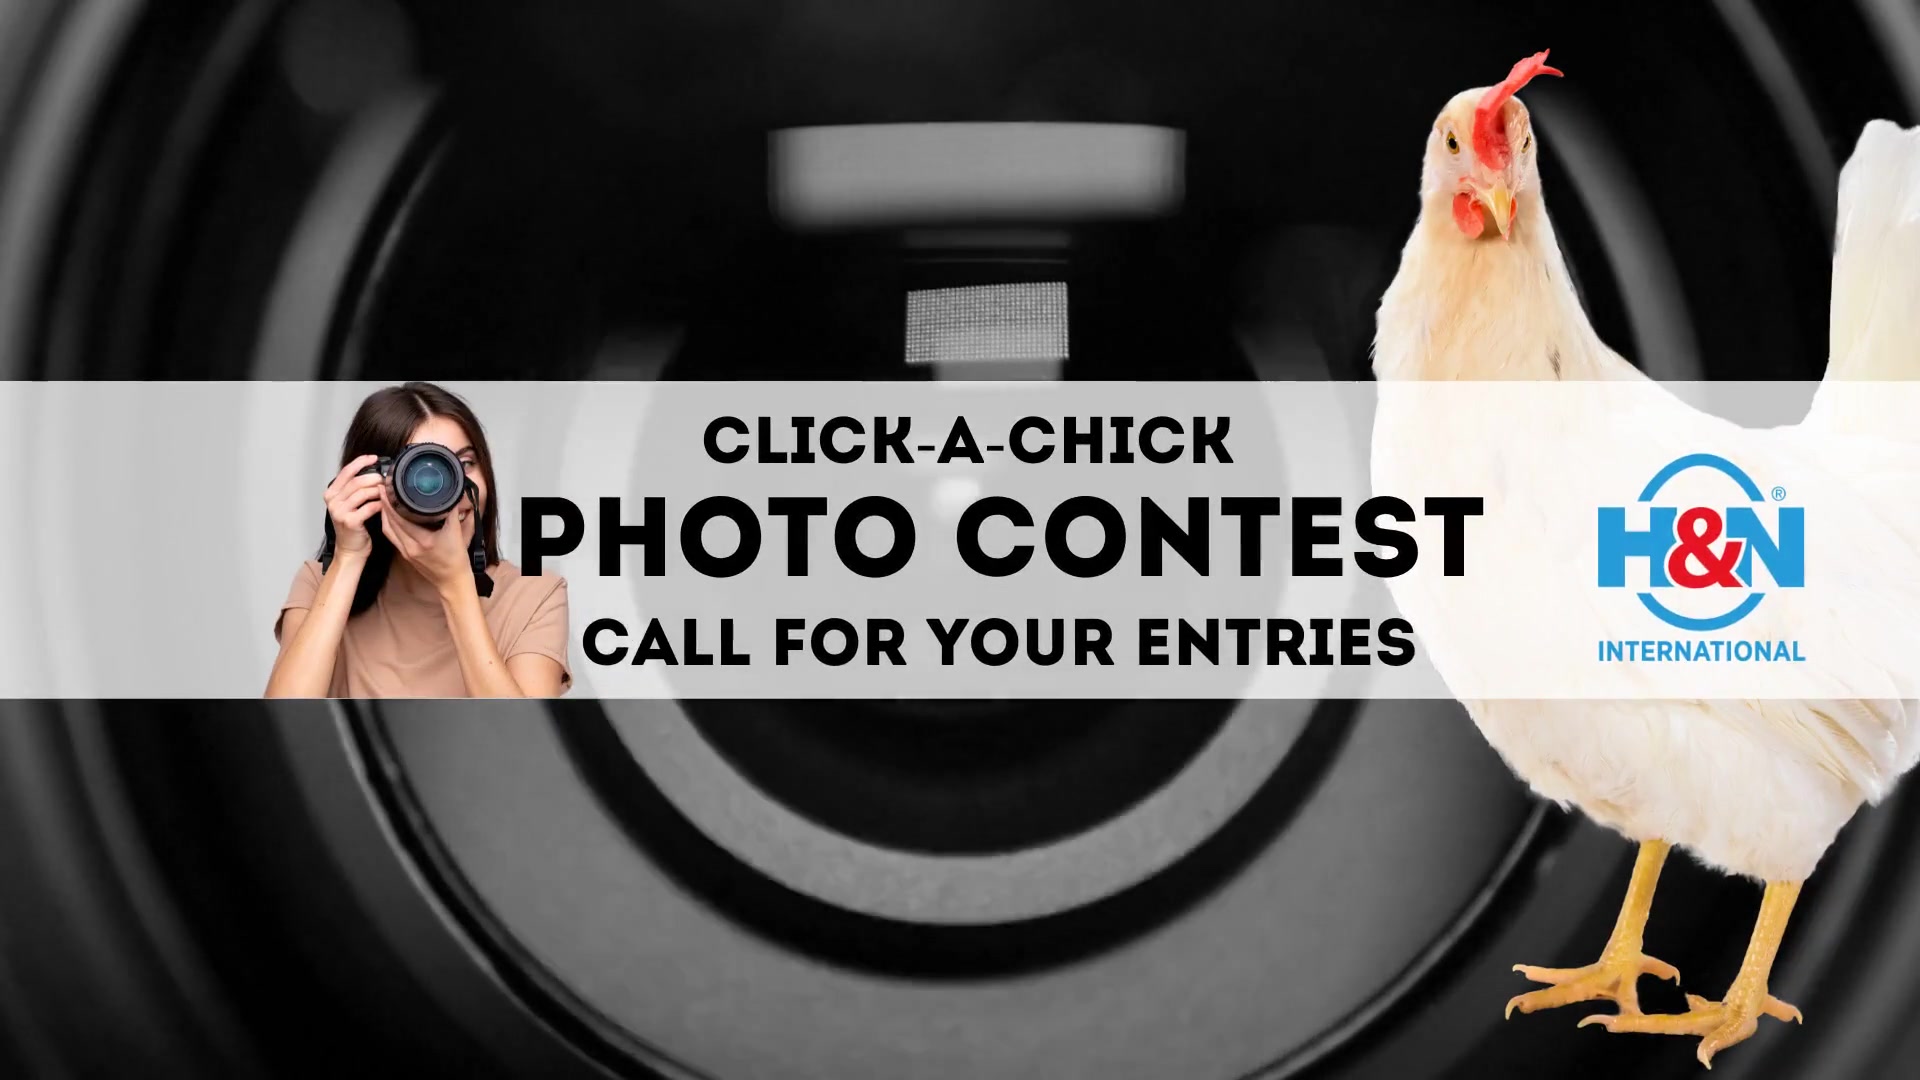 CLICK-A-CHICK – H&N INTERNATIONAL PHOTO CONTEST